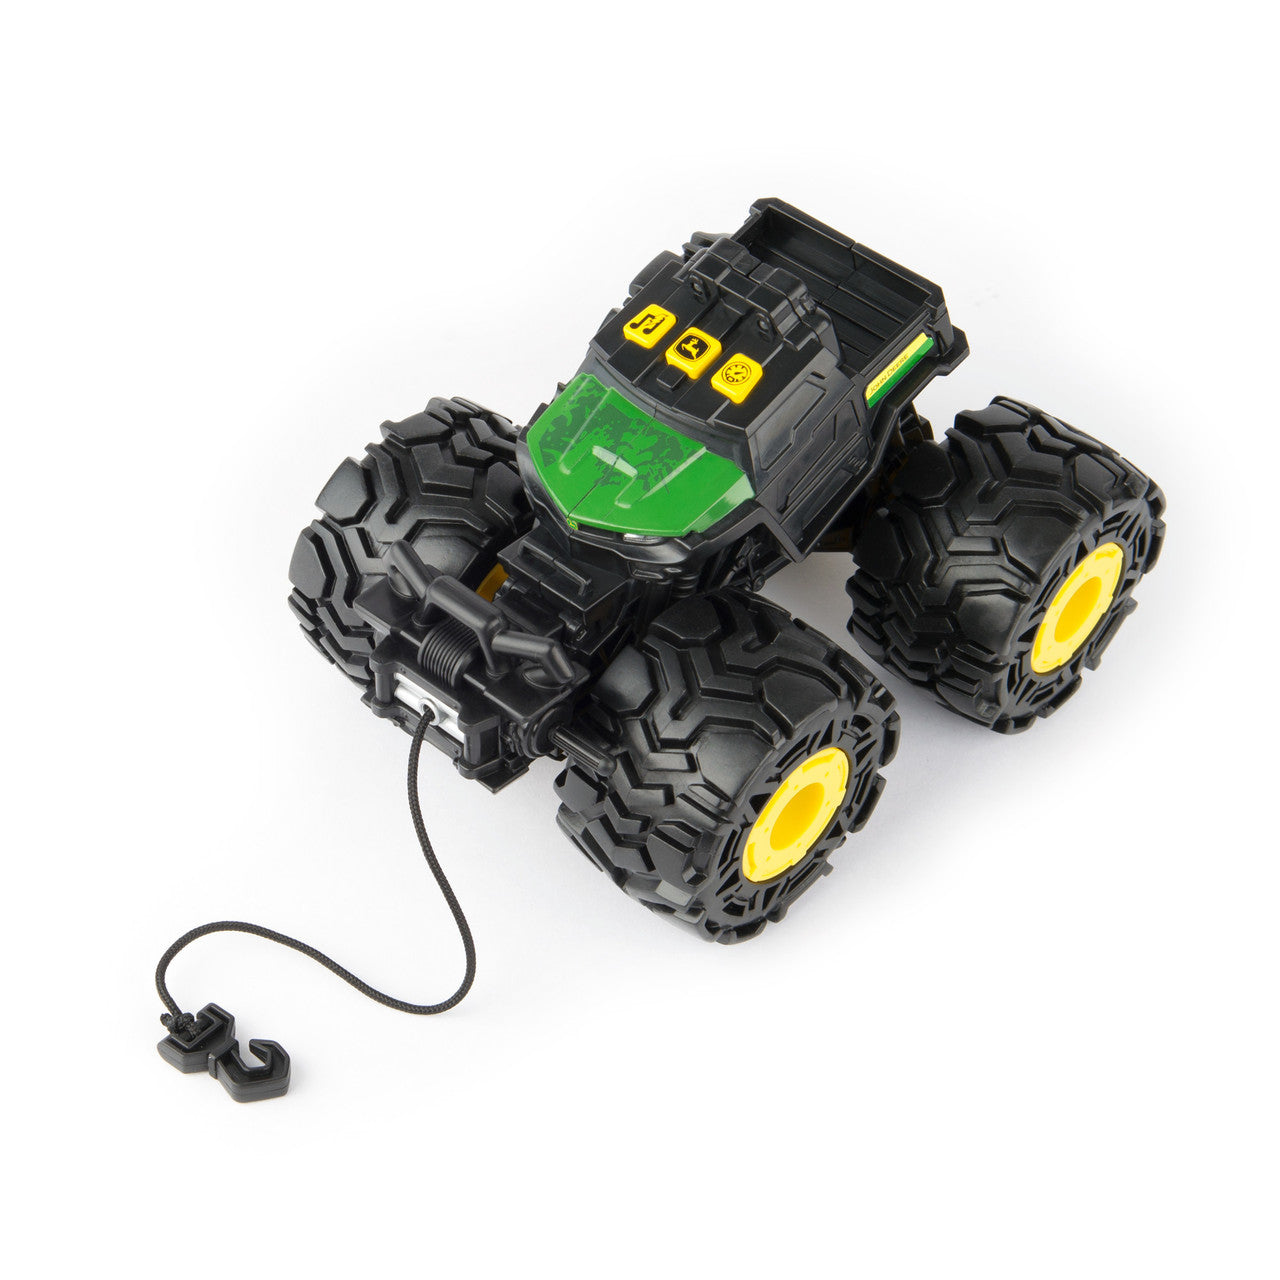 Monster Treads with lights and sounds